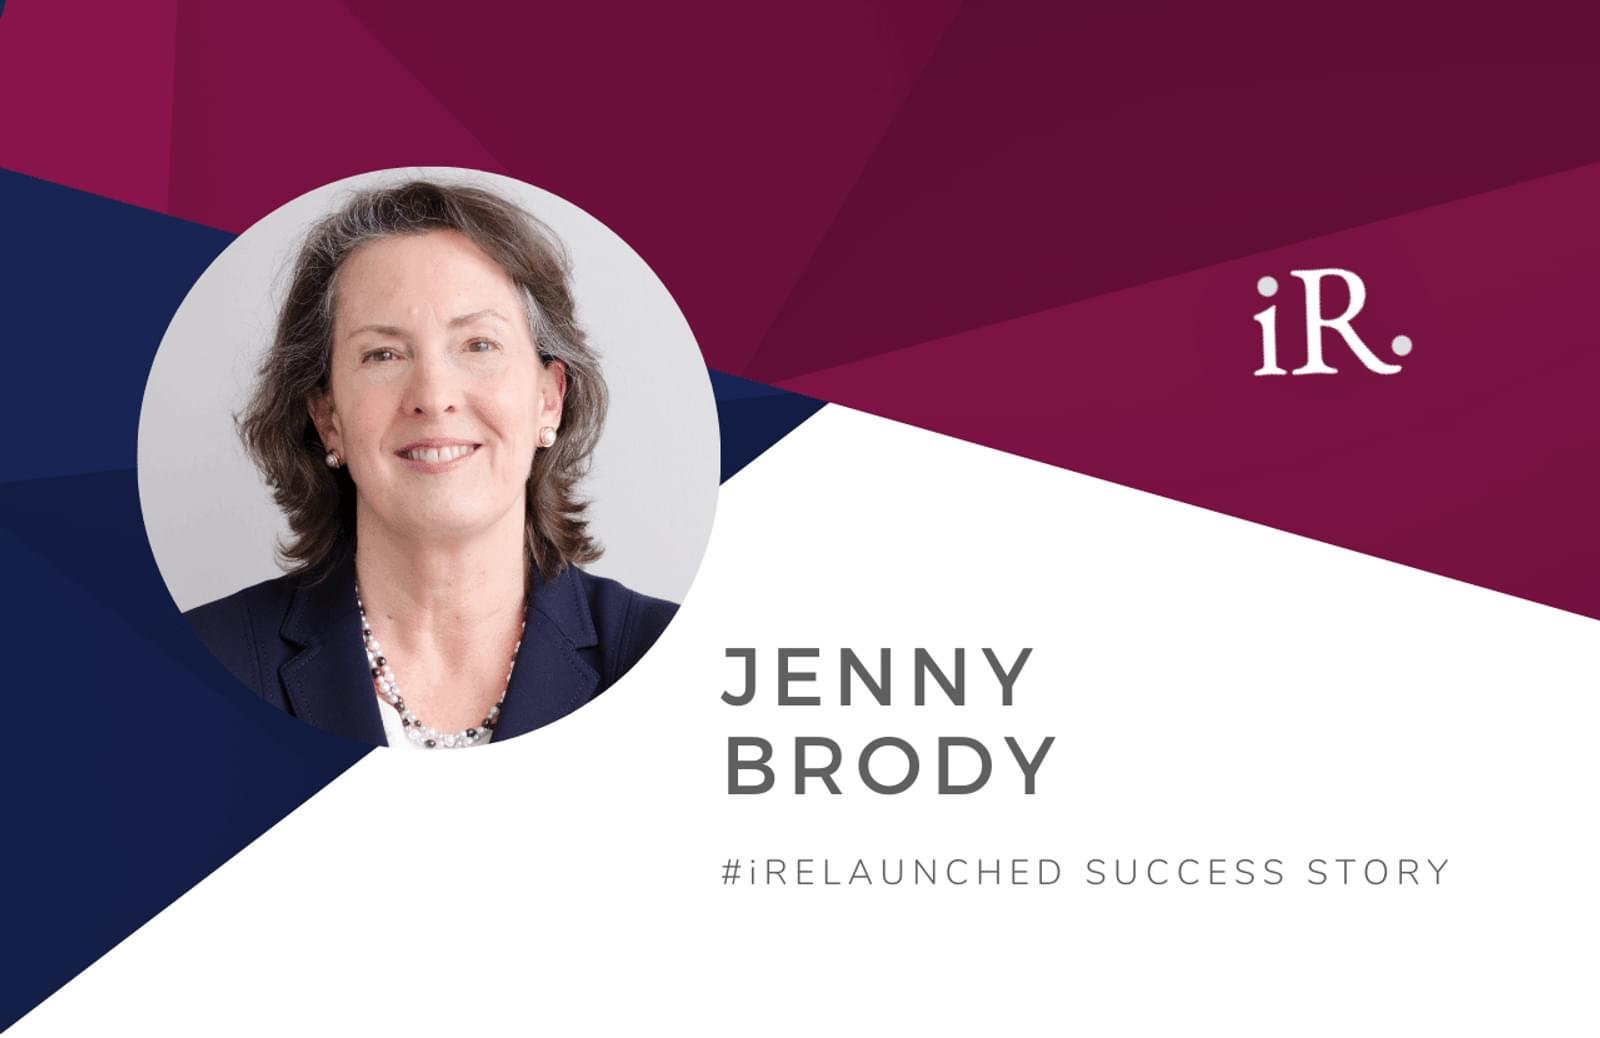 Jenny Brody's headshot and the text #iRelaunched Success Story along with the iRelaunch logo.  A navy and maroon geometric textured background intersect behind Jenny's headshot.